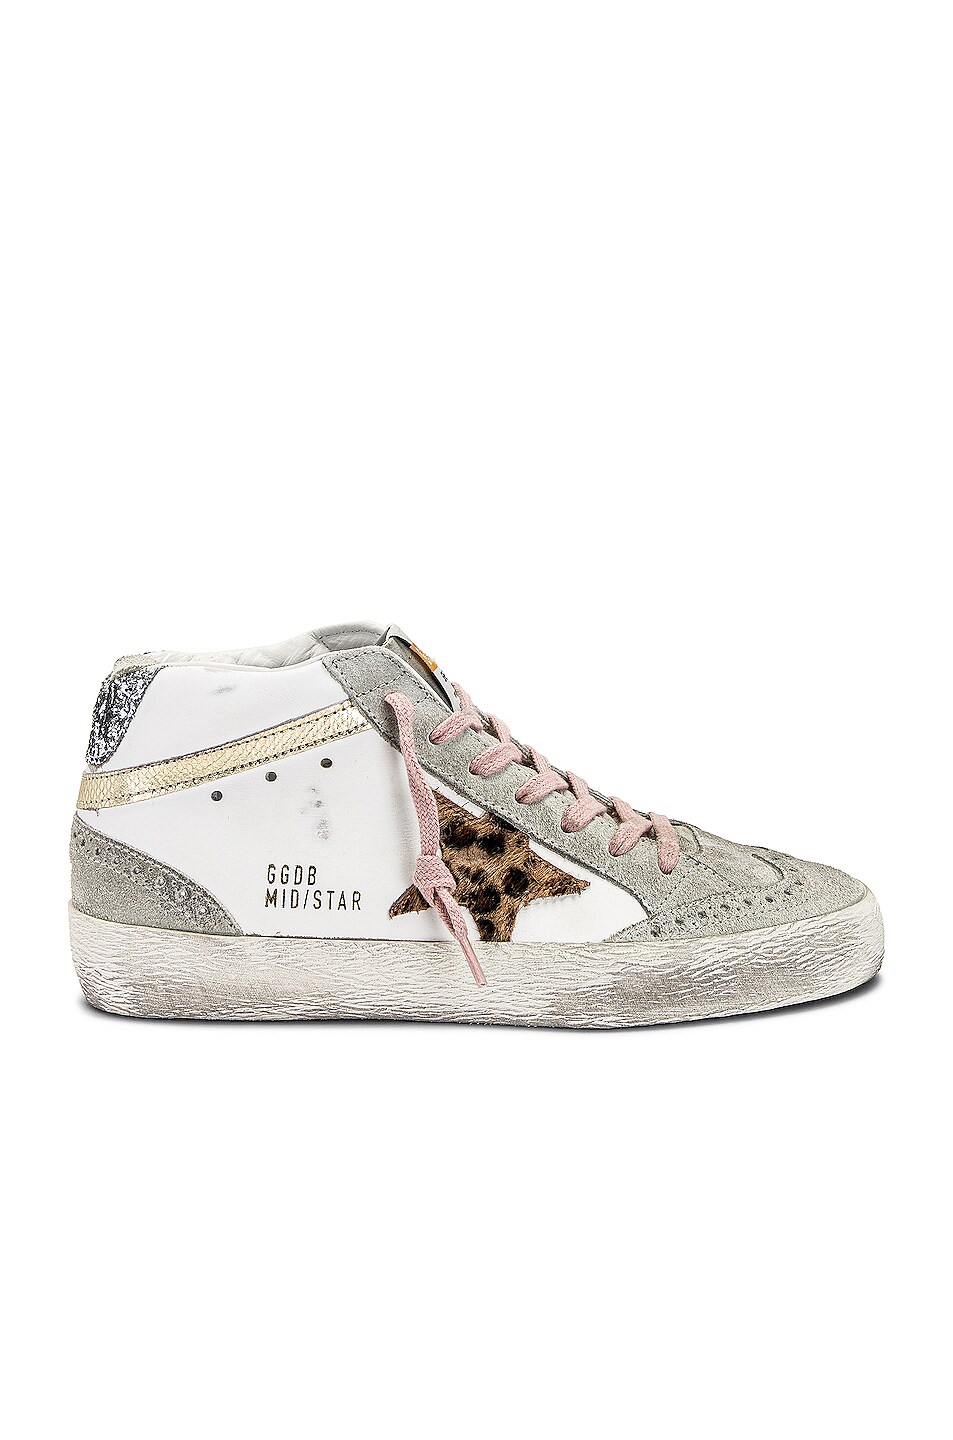 Image 1 of Golden Goose Mid Star Sneaker in White, Beige Brown Leopard, Ice, Platinum, & Silver